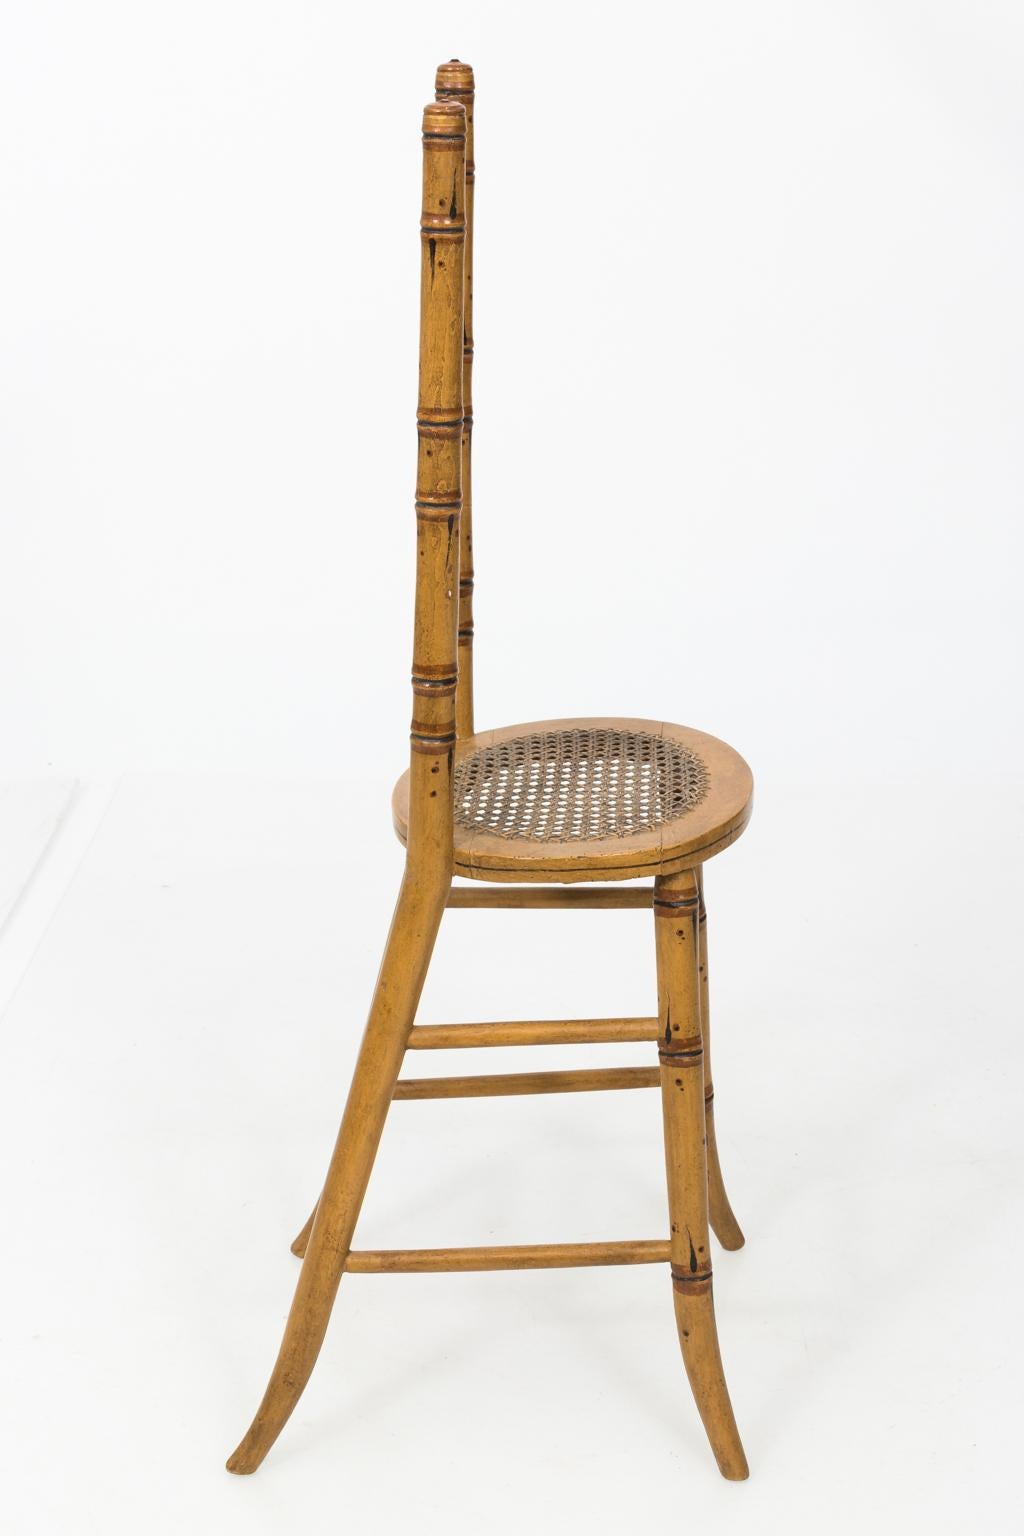 Late 19th Century Faux Bamboo Child's Chair 3